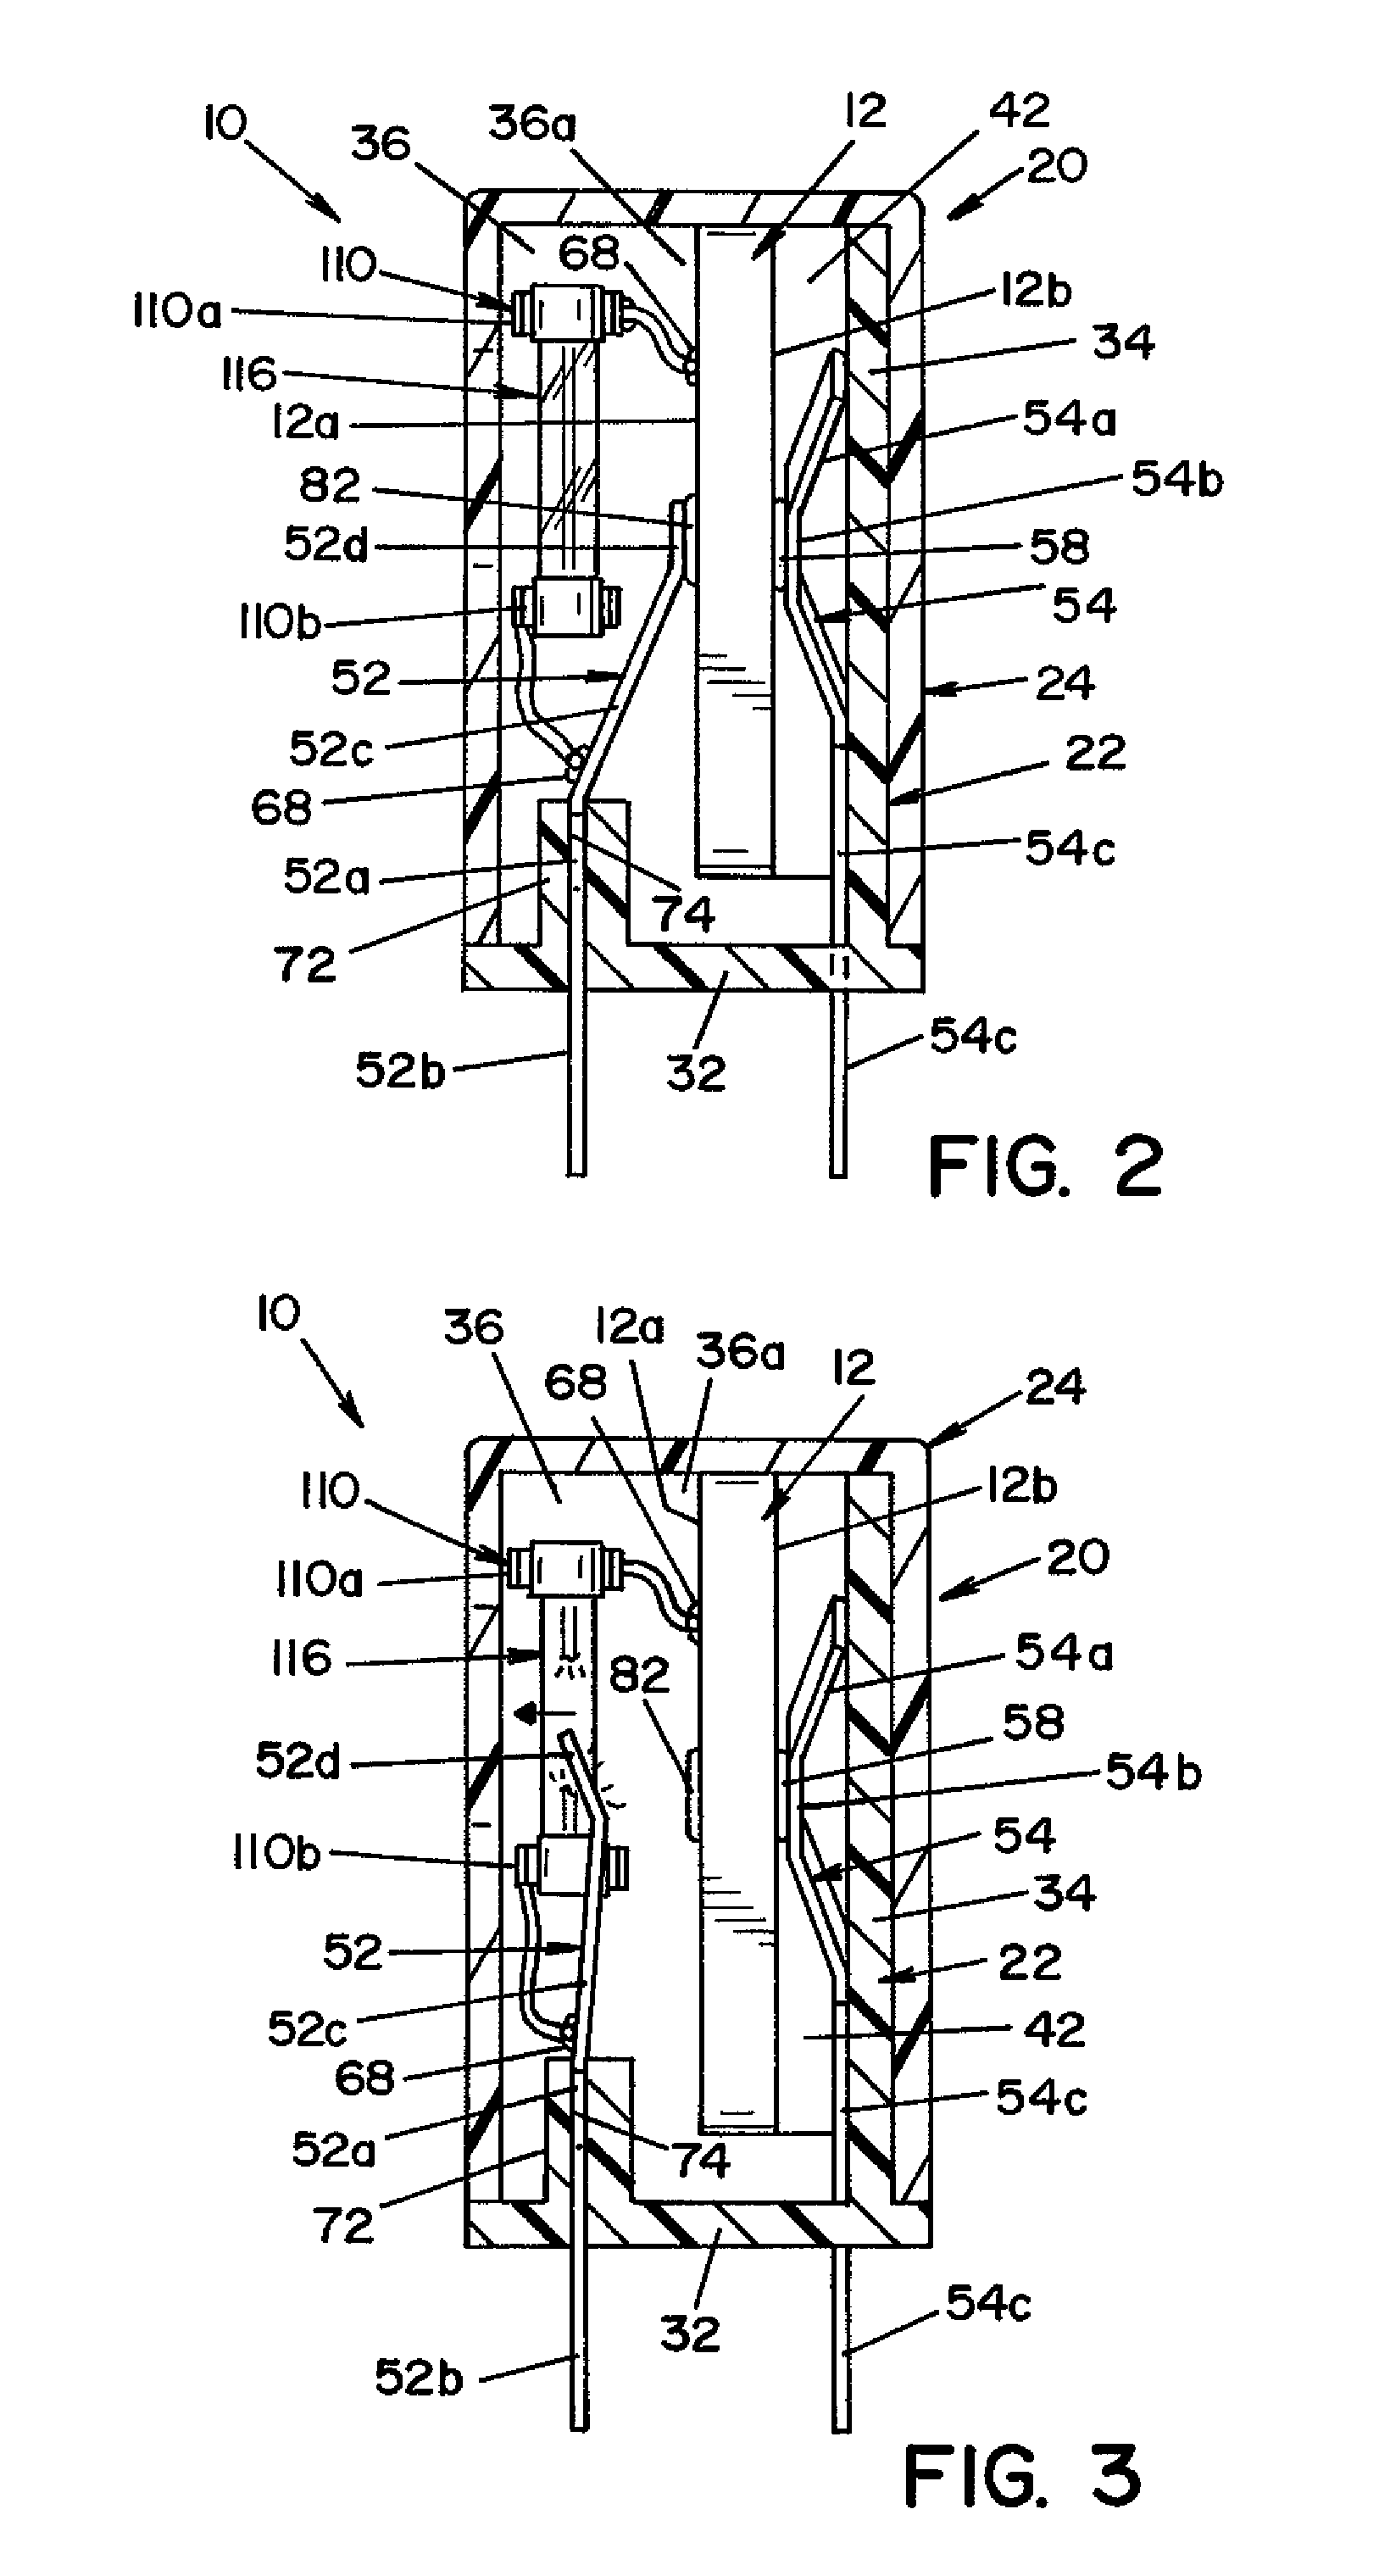 Circuit protection device